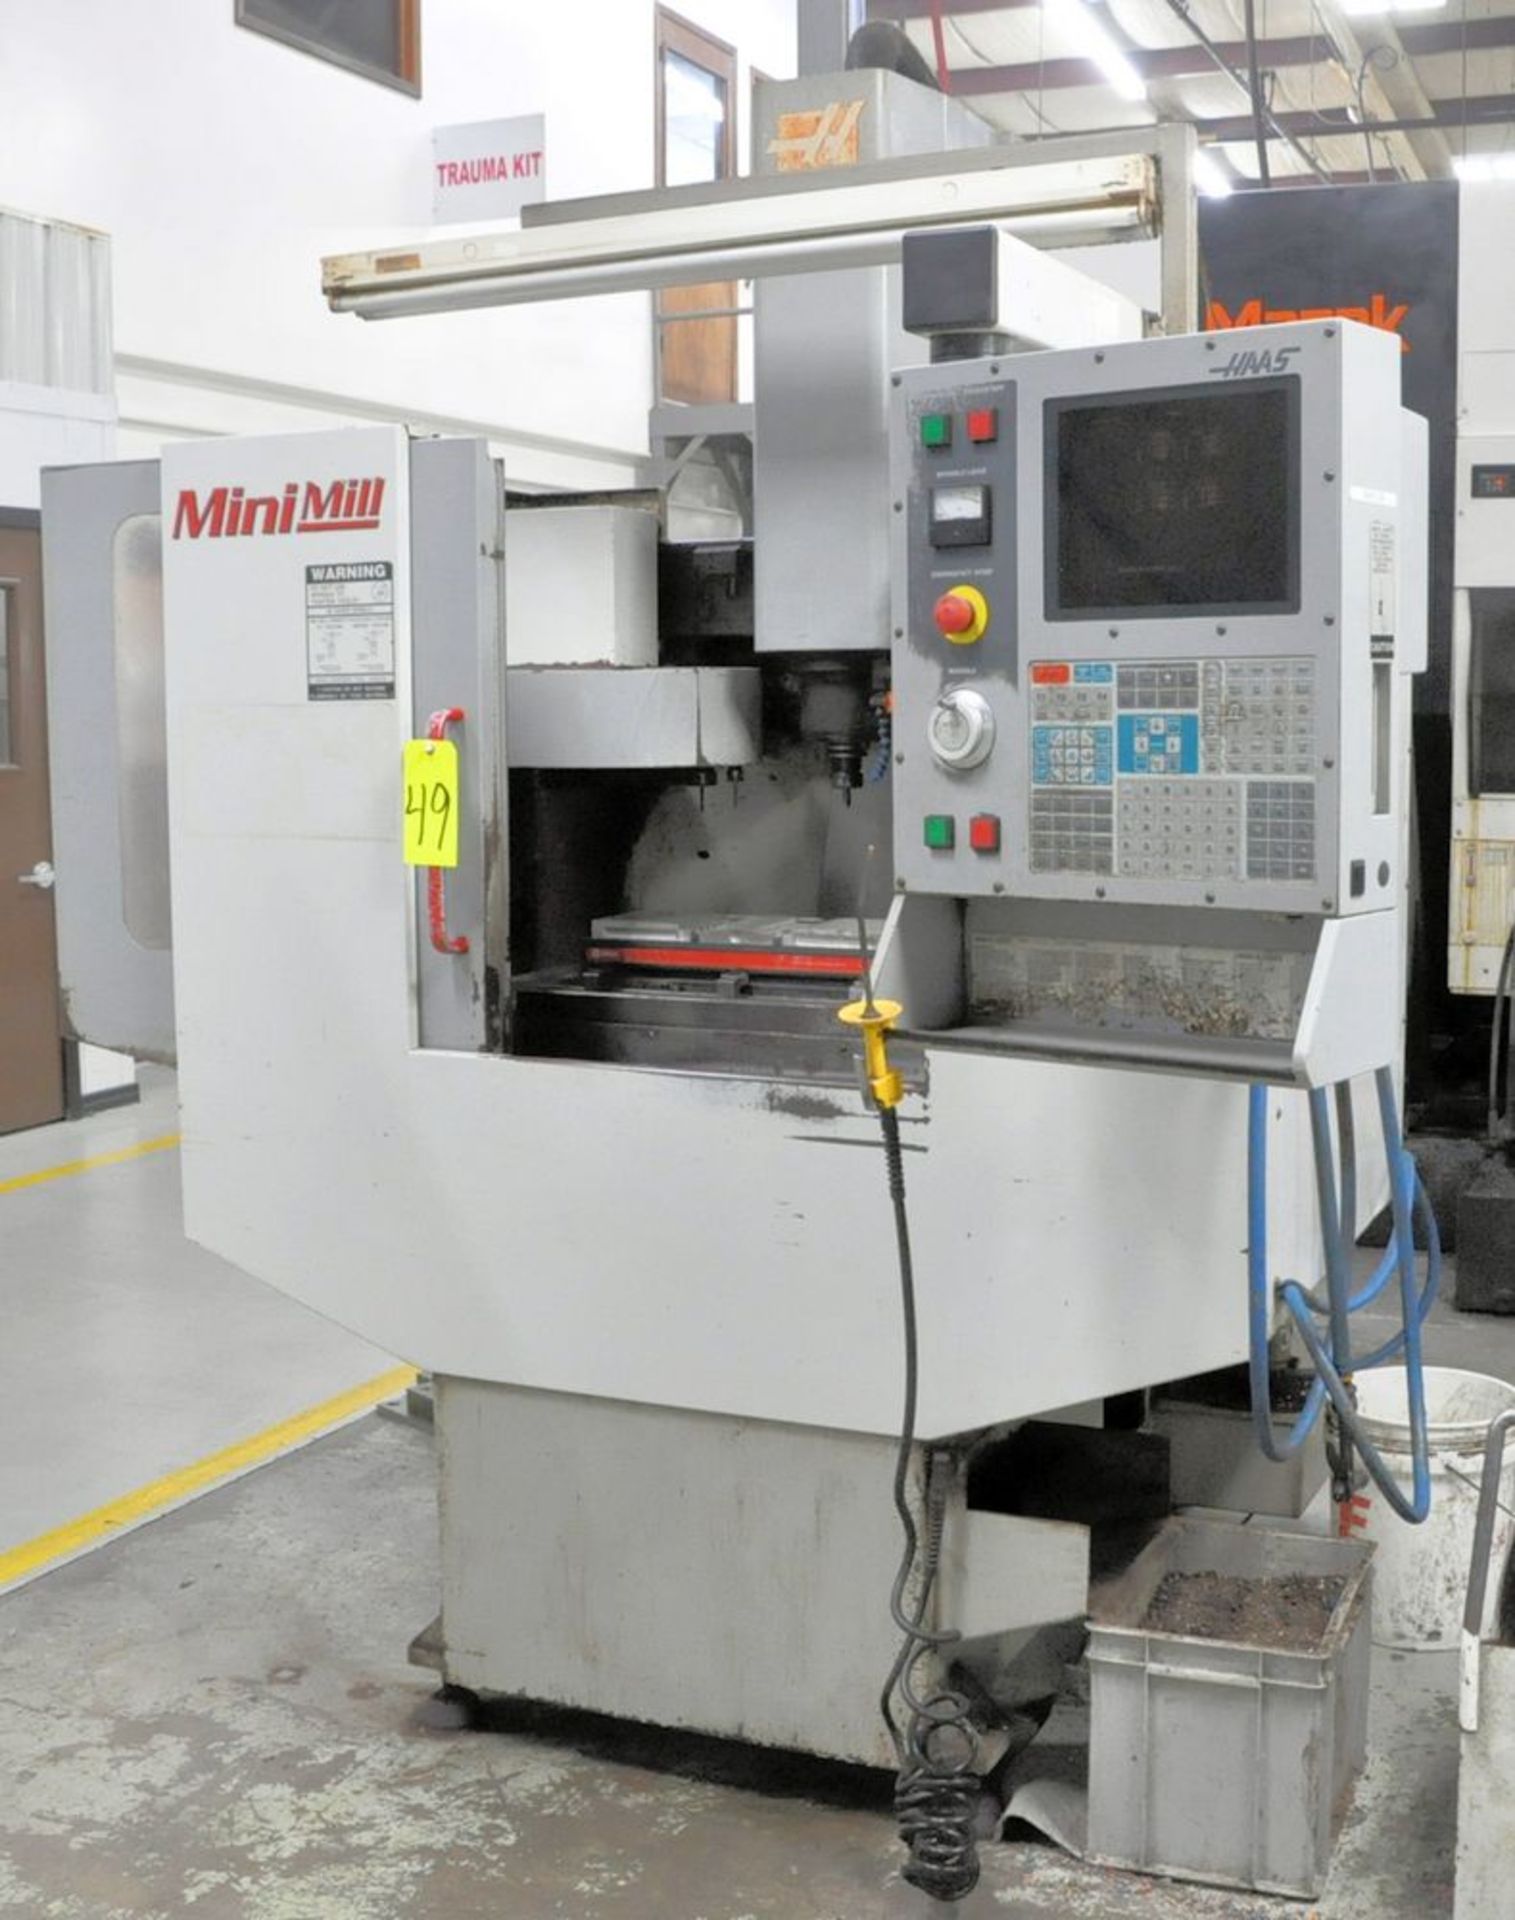 Haas Model Mini-Mill CNC Vertical Machining Center, S/n 26993 - Image 2 of 8